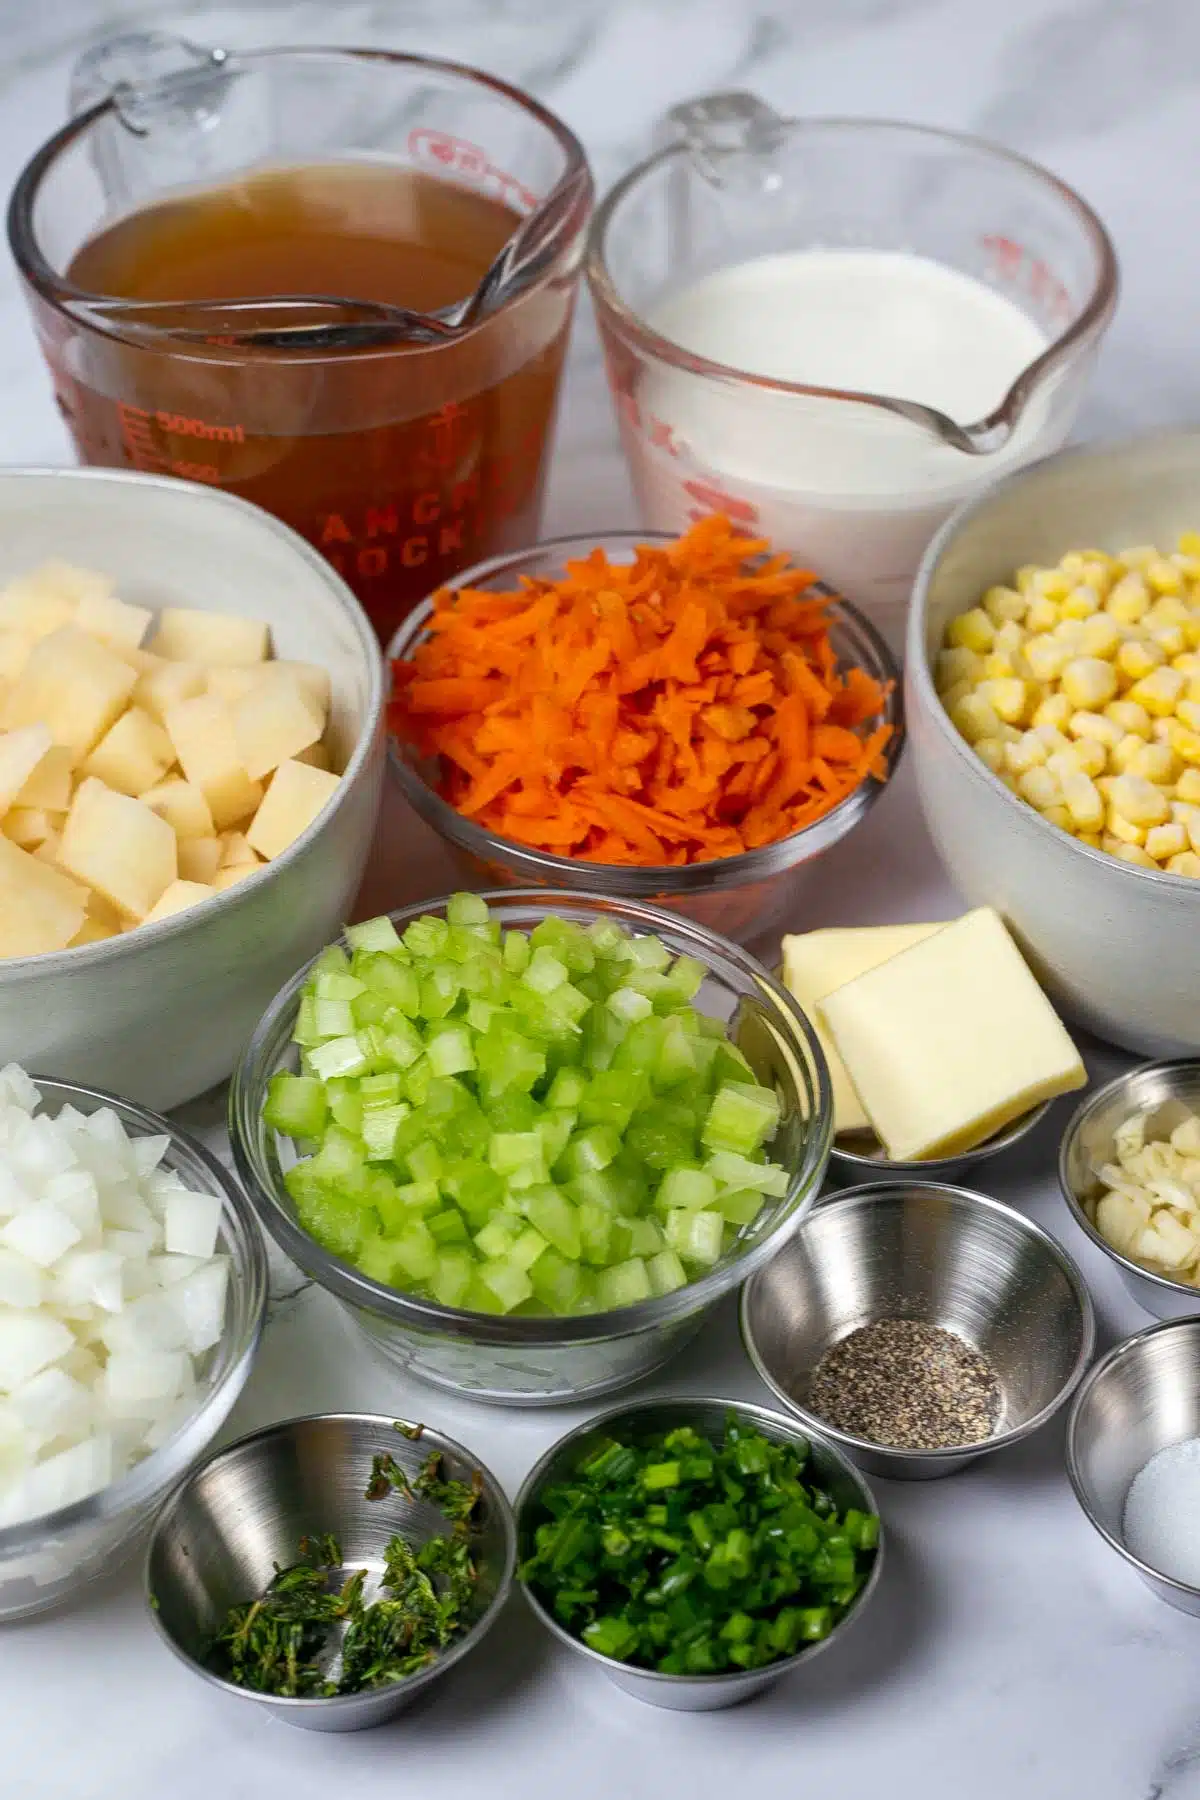 Tall image showing corn soup ingredients.